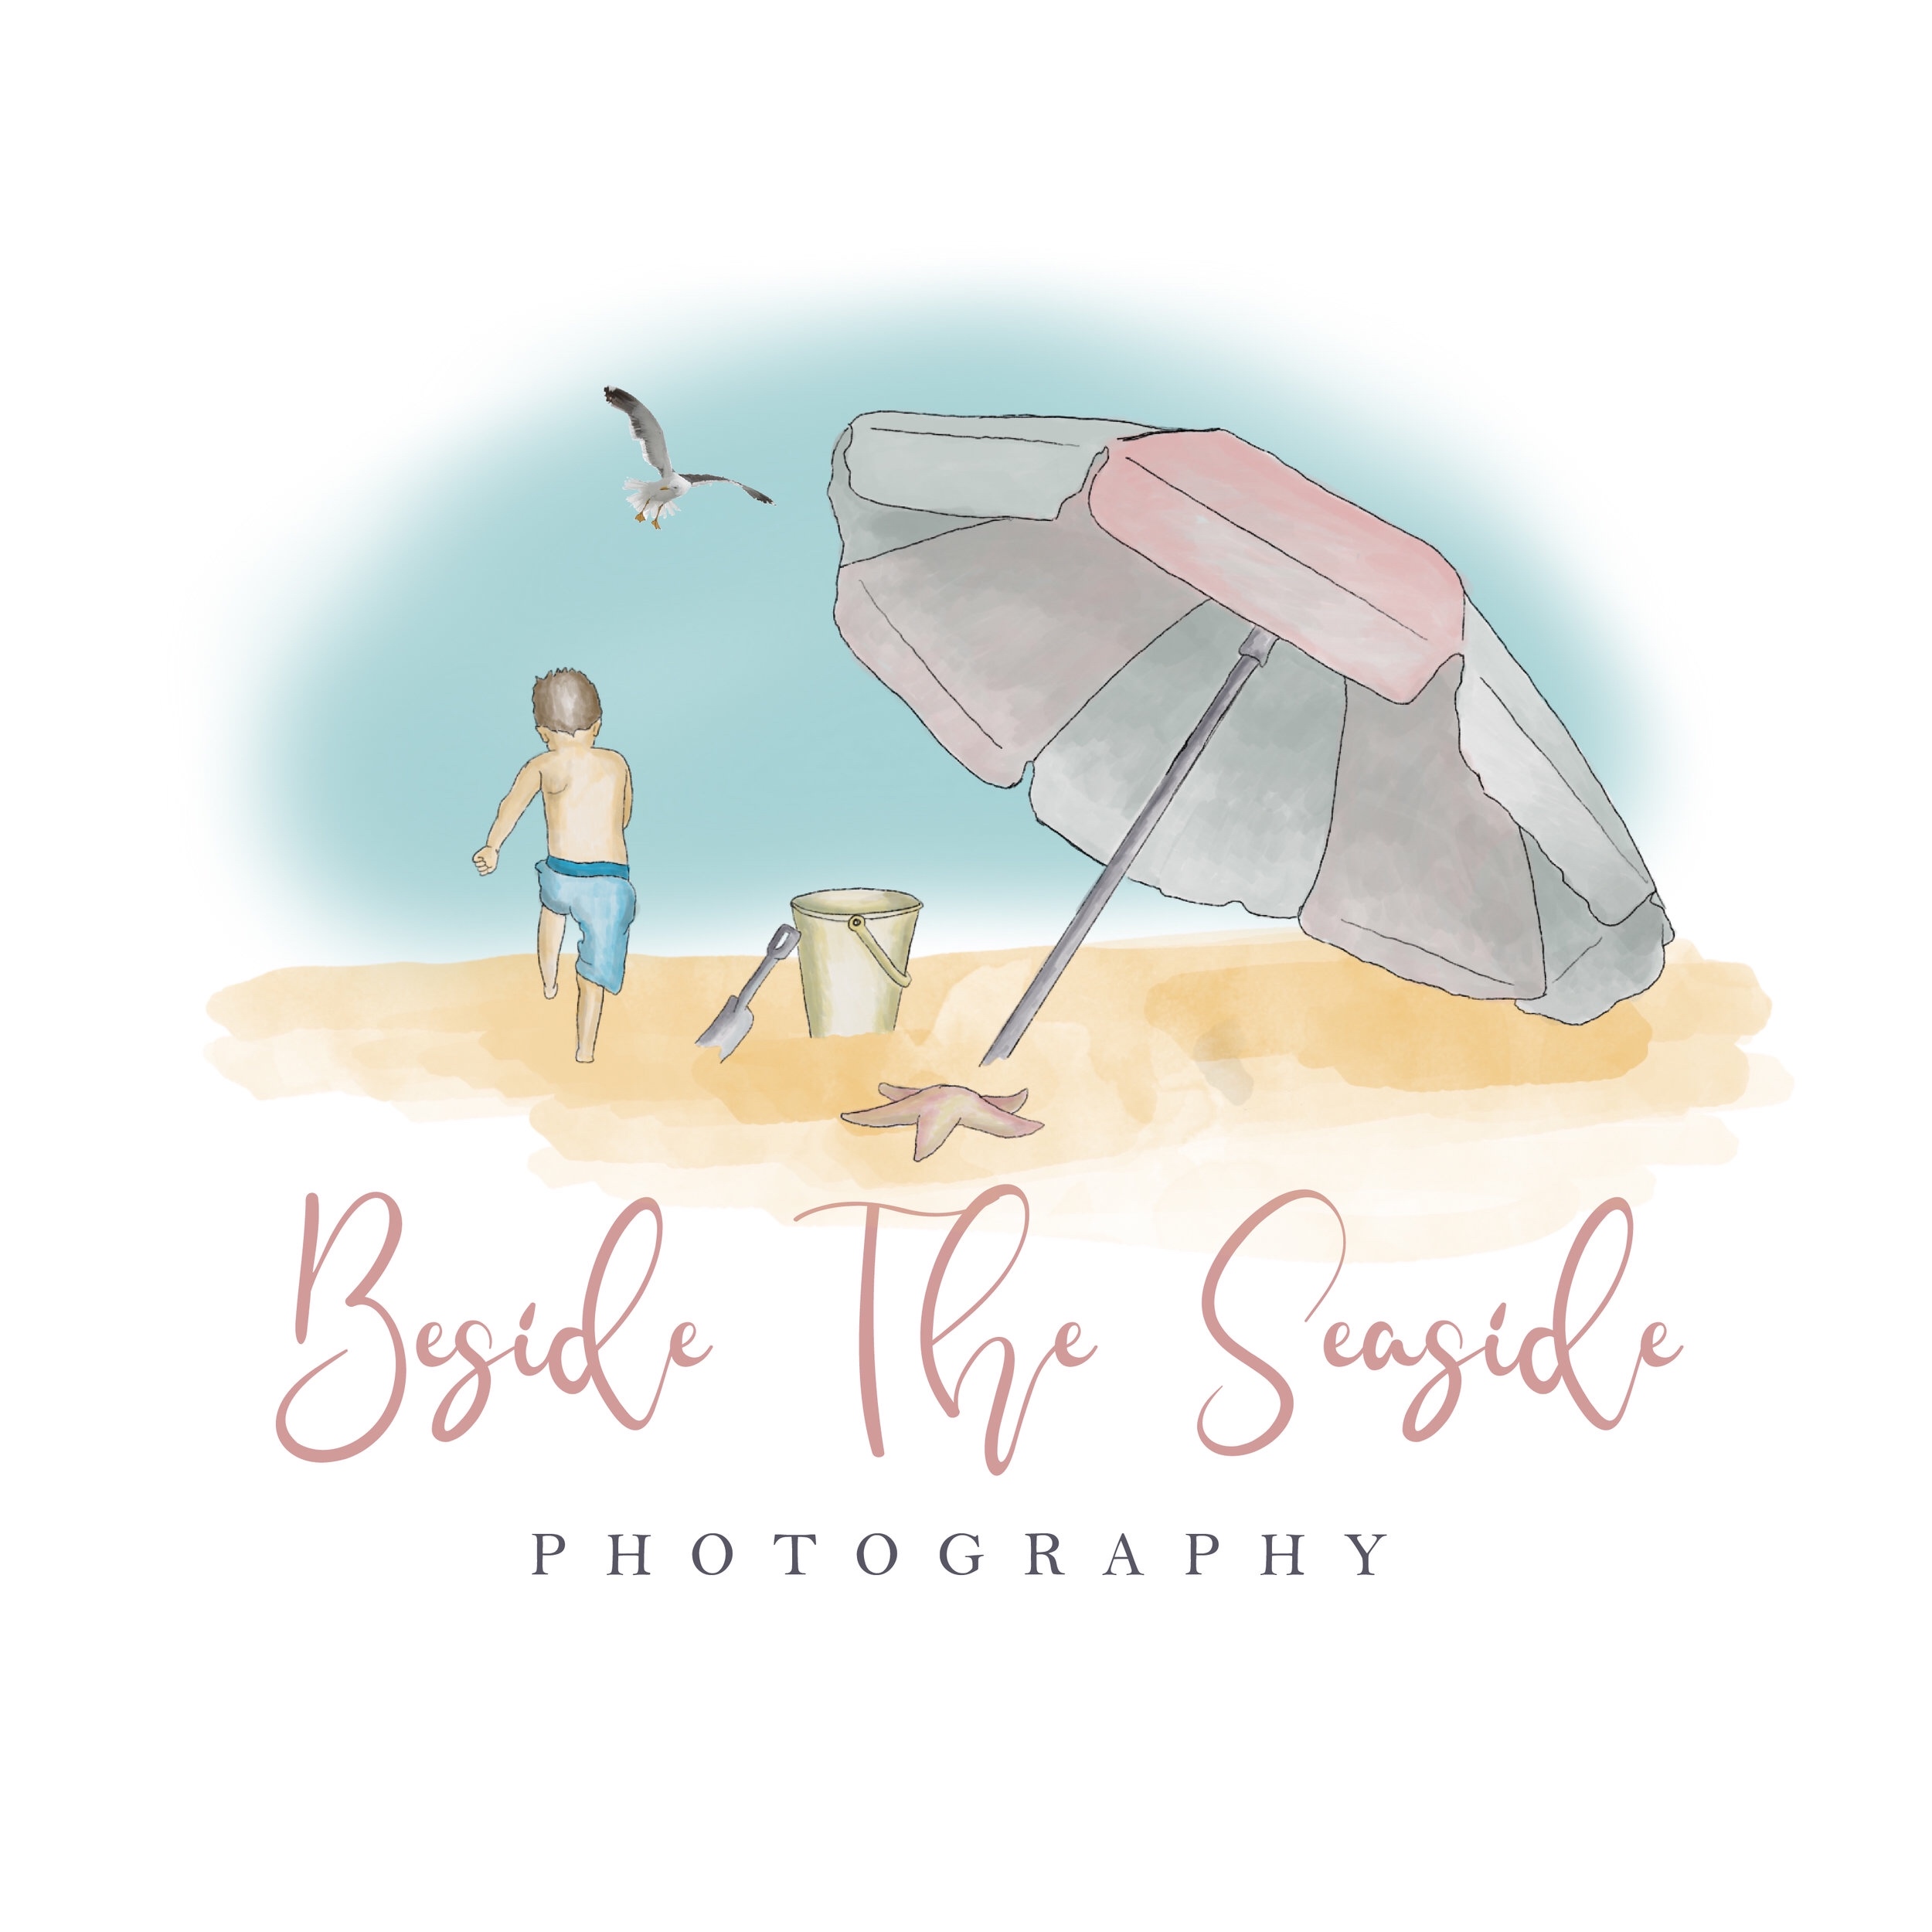 Beside The Seaside Photography 